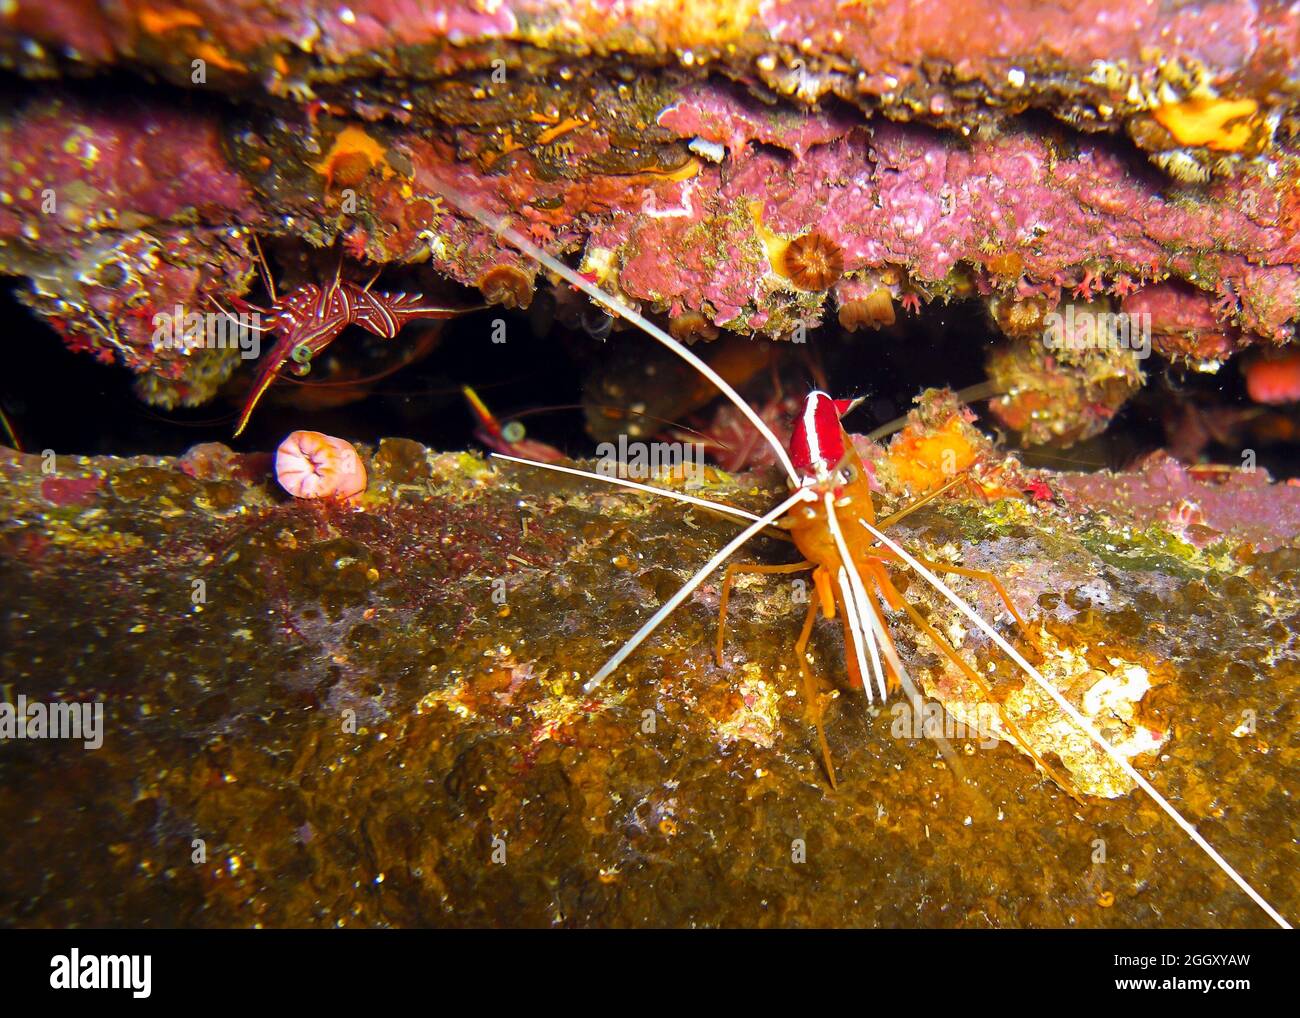 Dancing Shrimp (Rhynchocinetes Durbanensis) on the ground in the filipino sea 19.2.2012 Stock Photo